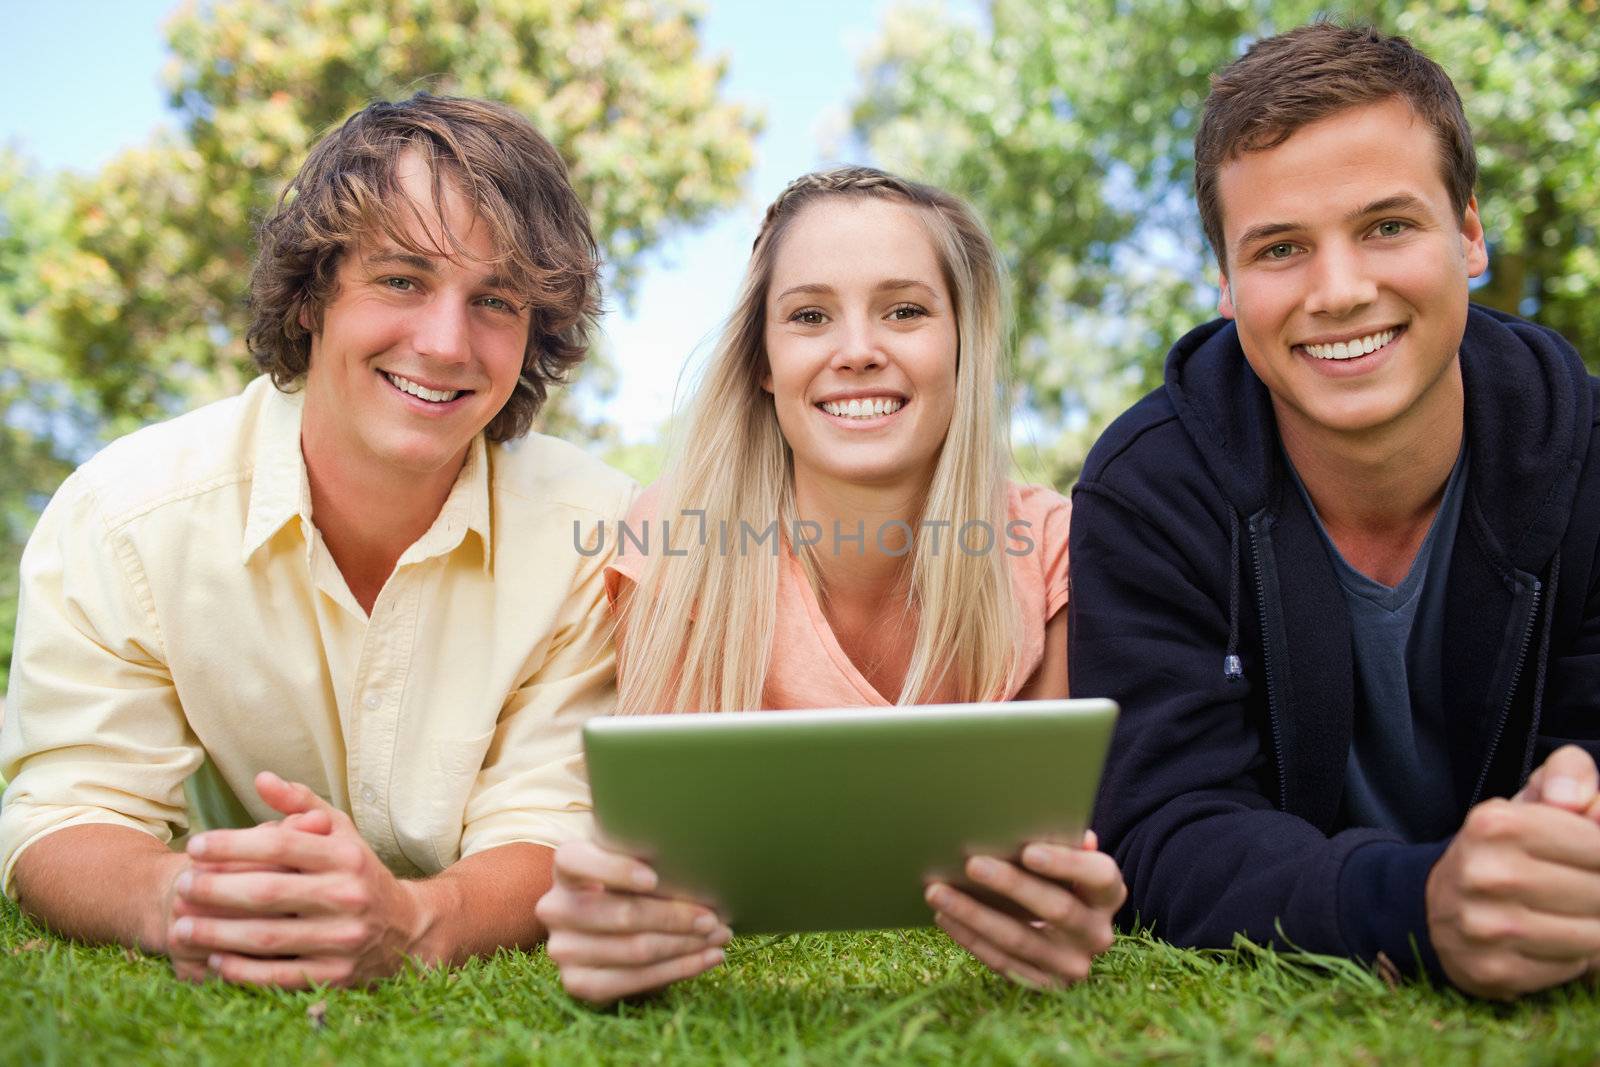 Three smiling students using a tactile tablet while lying in a park